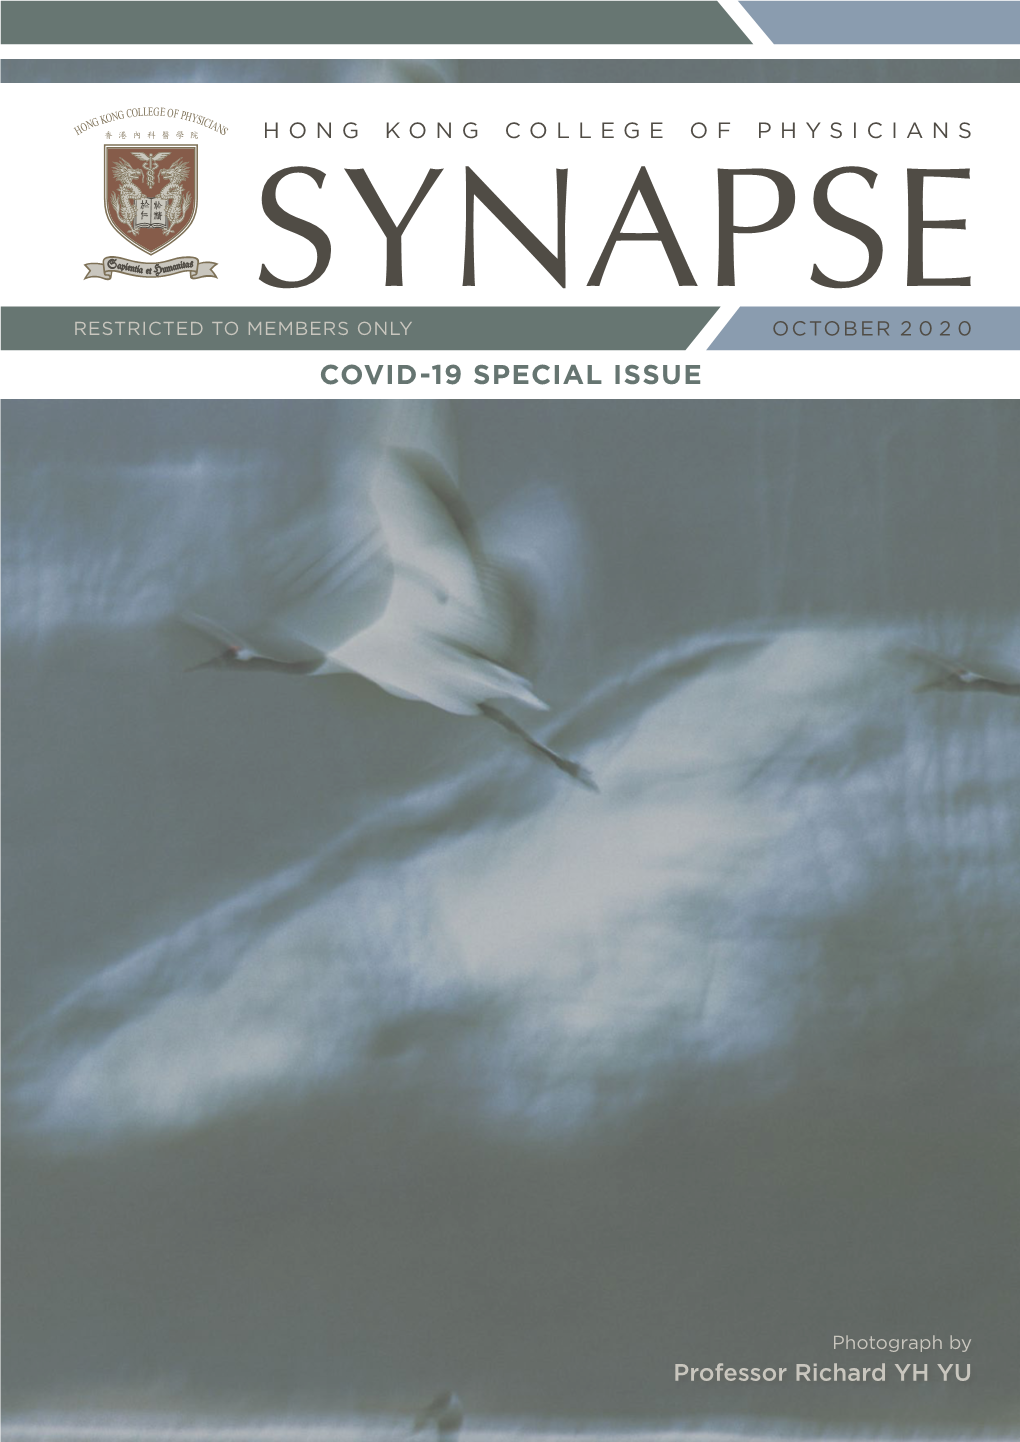 Covid-19 Special Issue